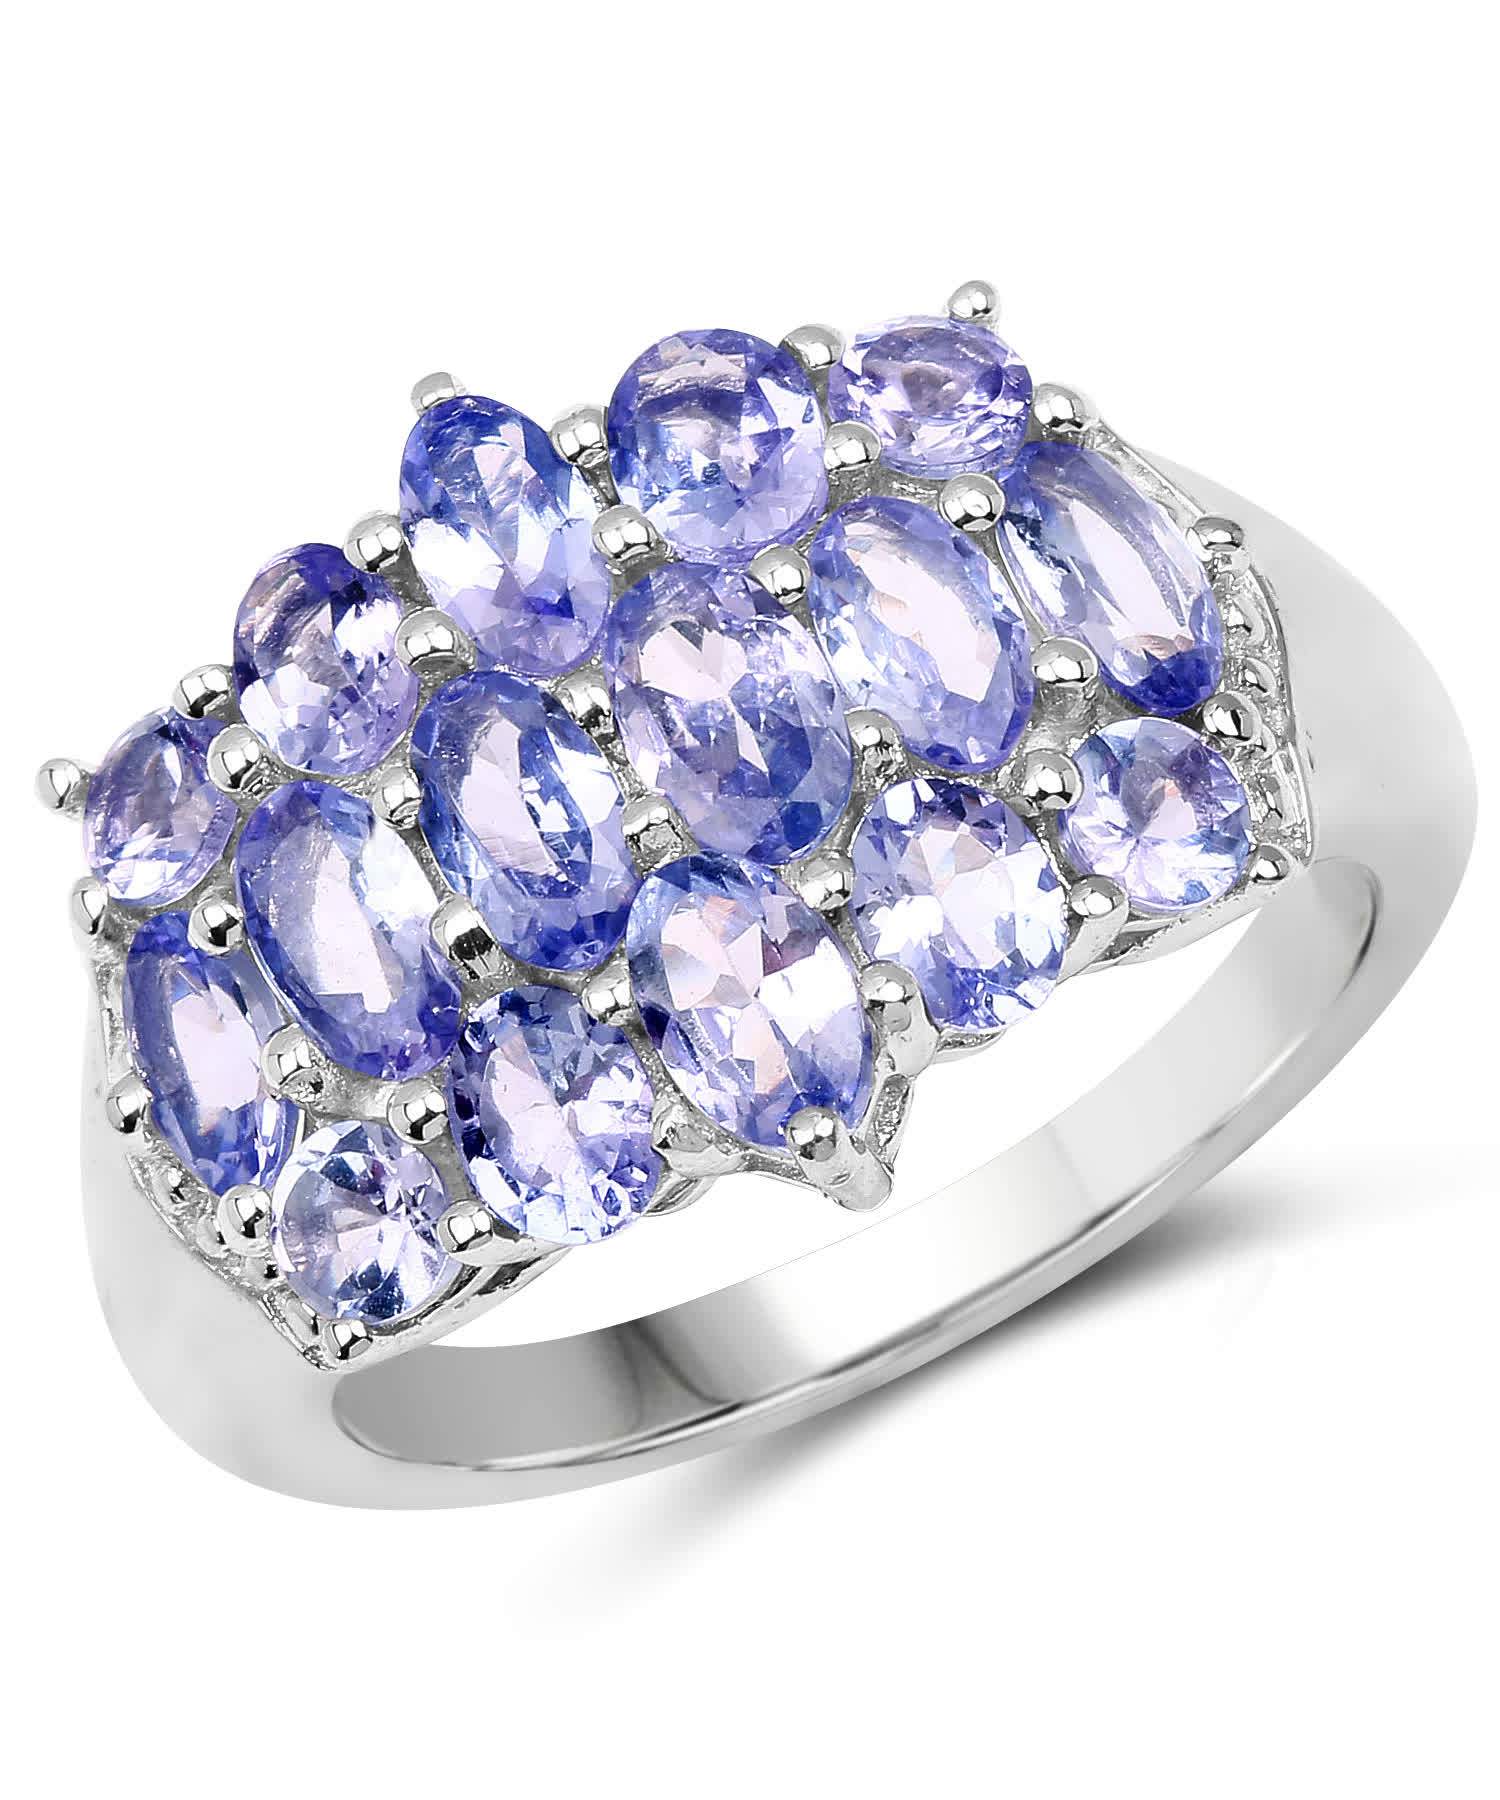 3.08ctw Natural Tanzanite Rhodium Plated 925 Sterling Silver Right Hand Ring View 1